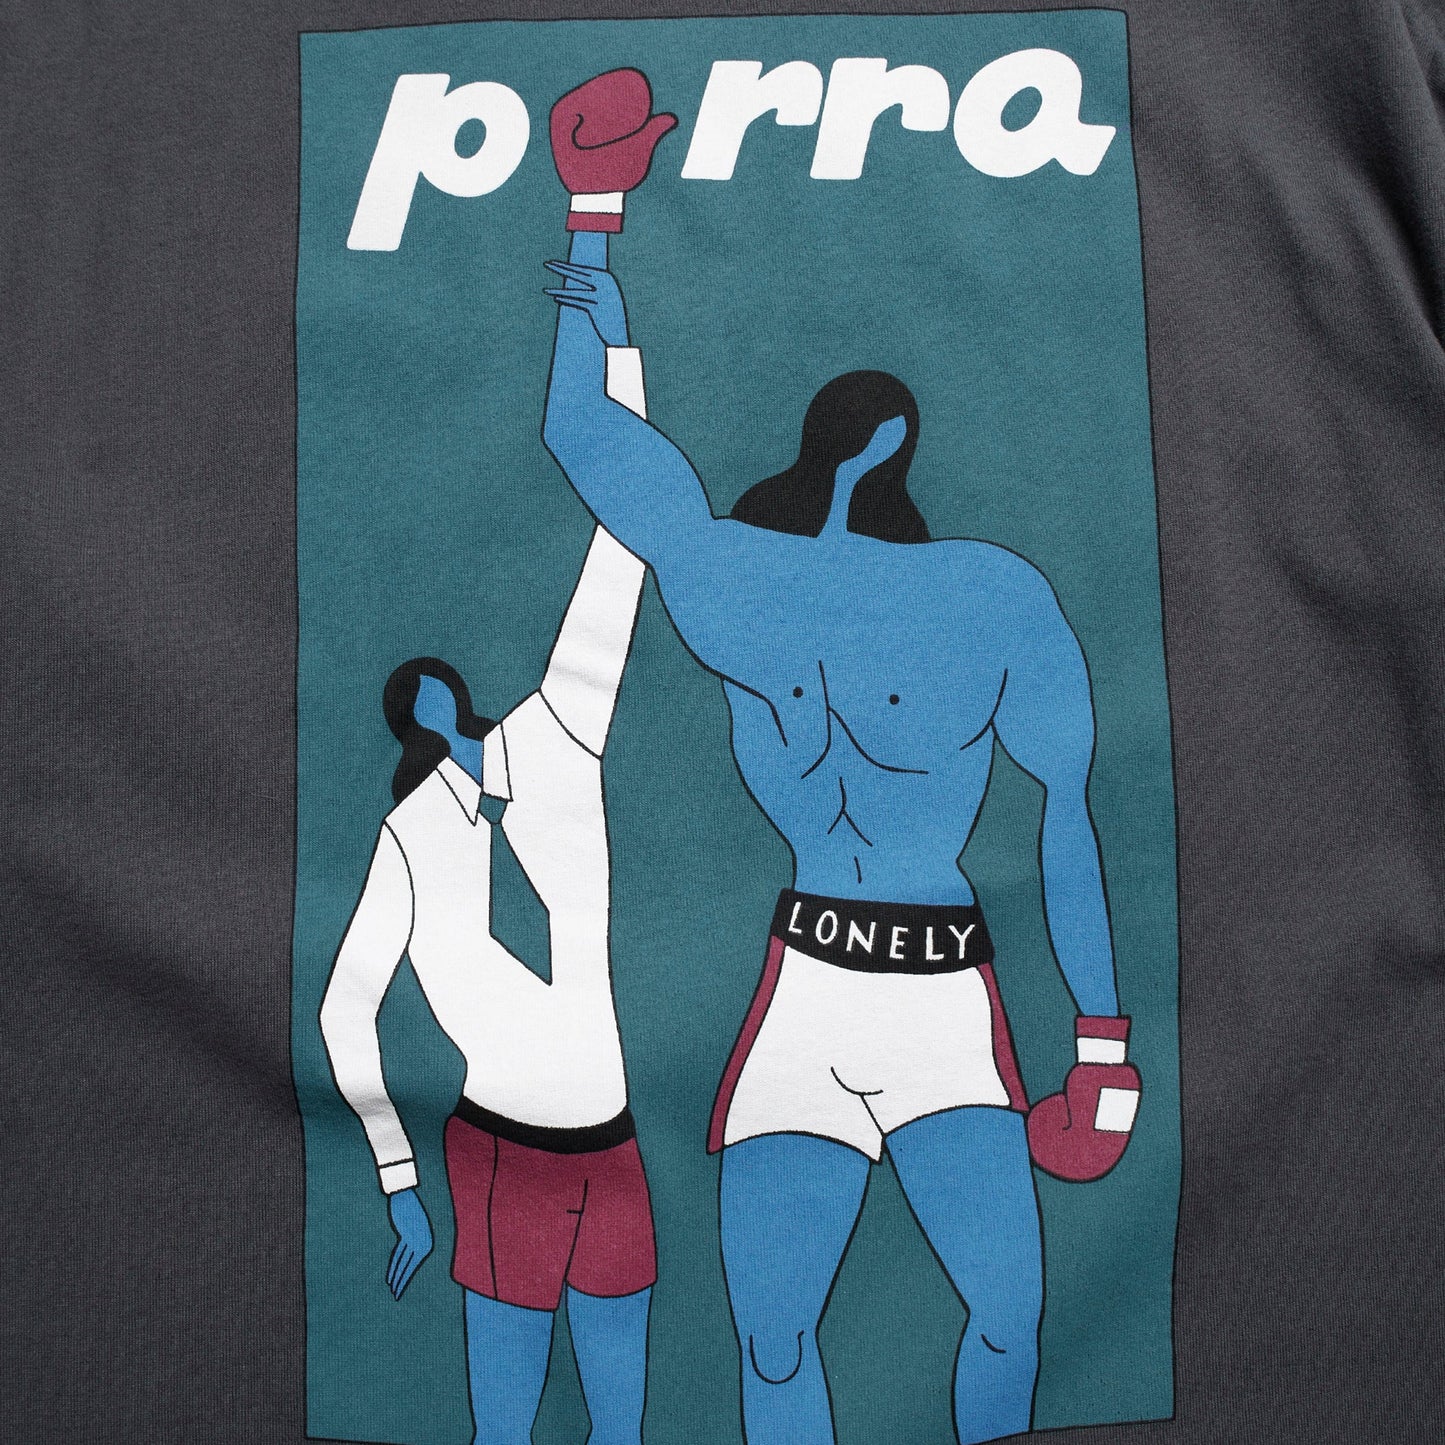 By Parra T-Shirts ROUND 12 T-SHIRT